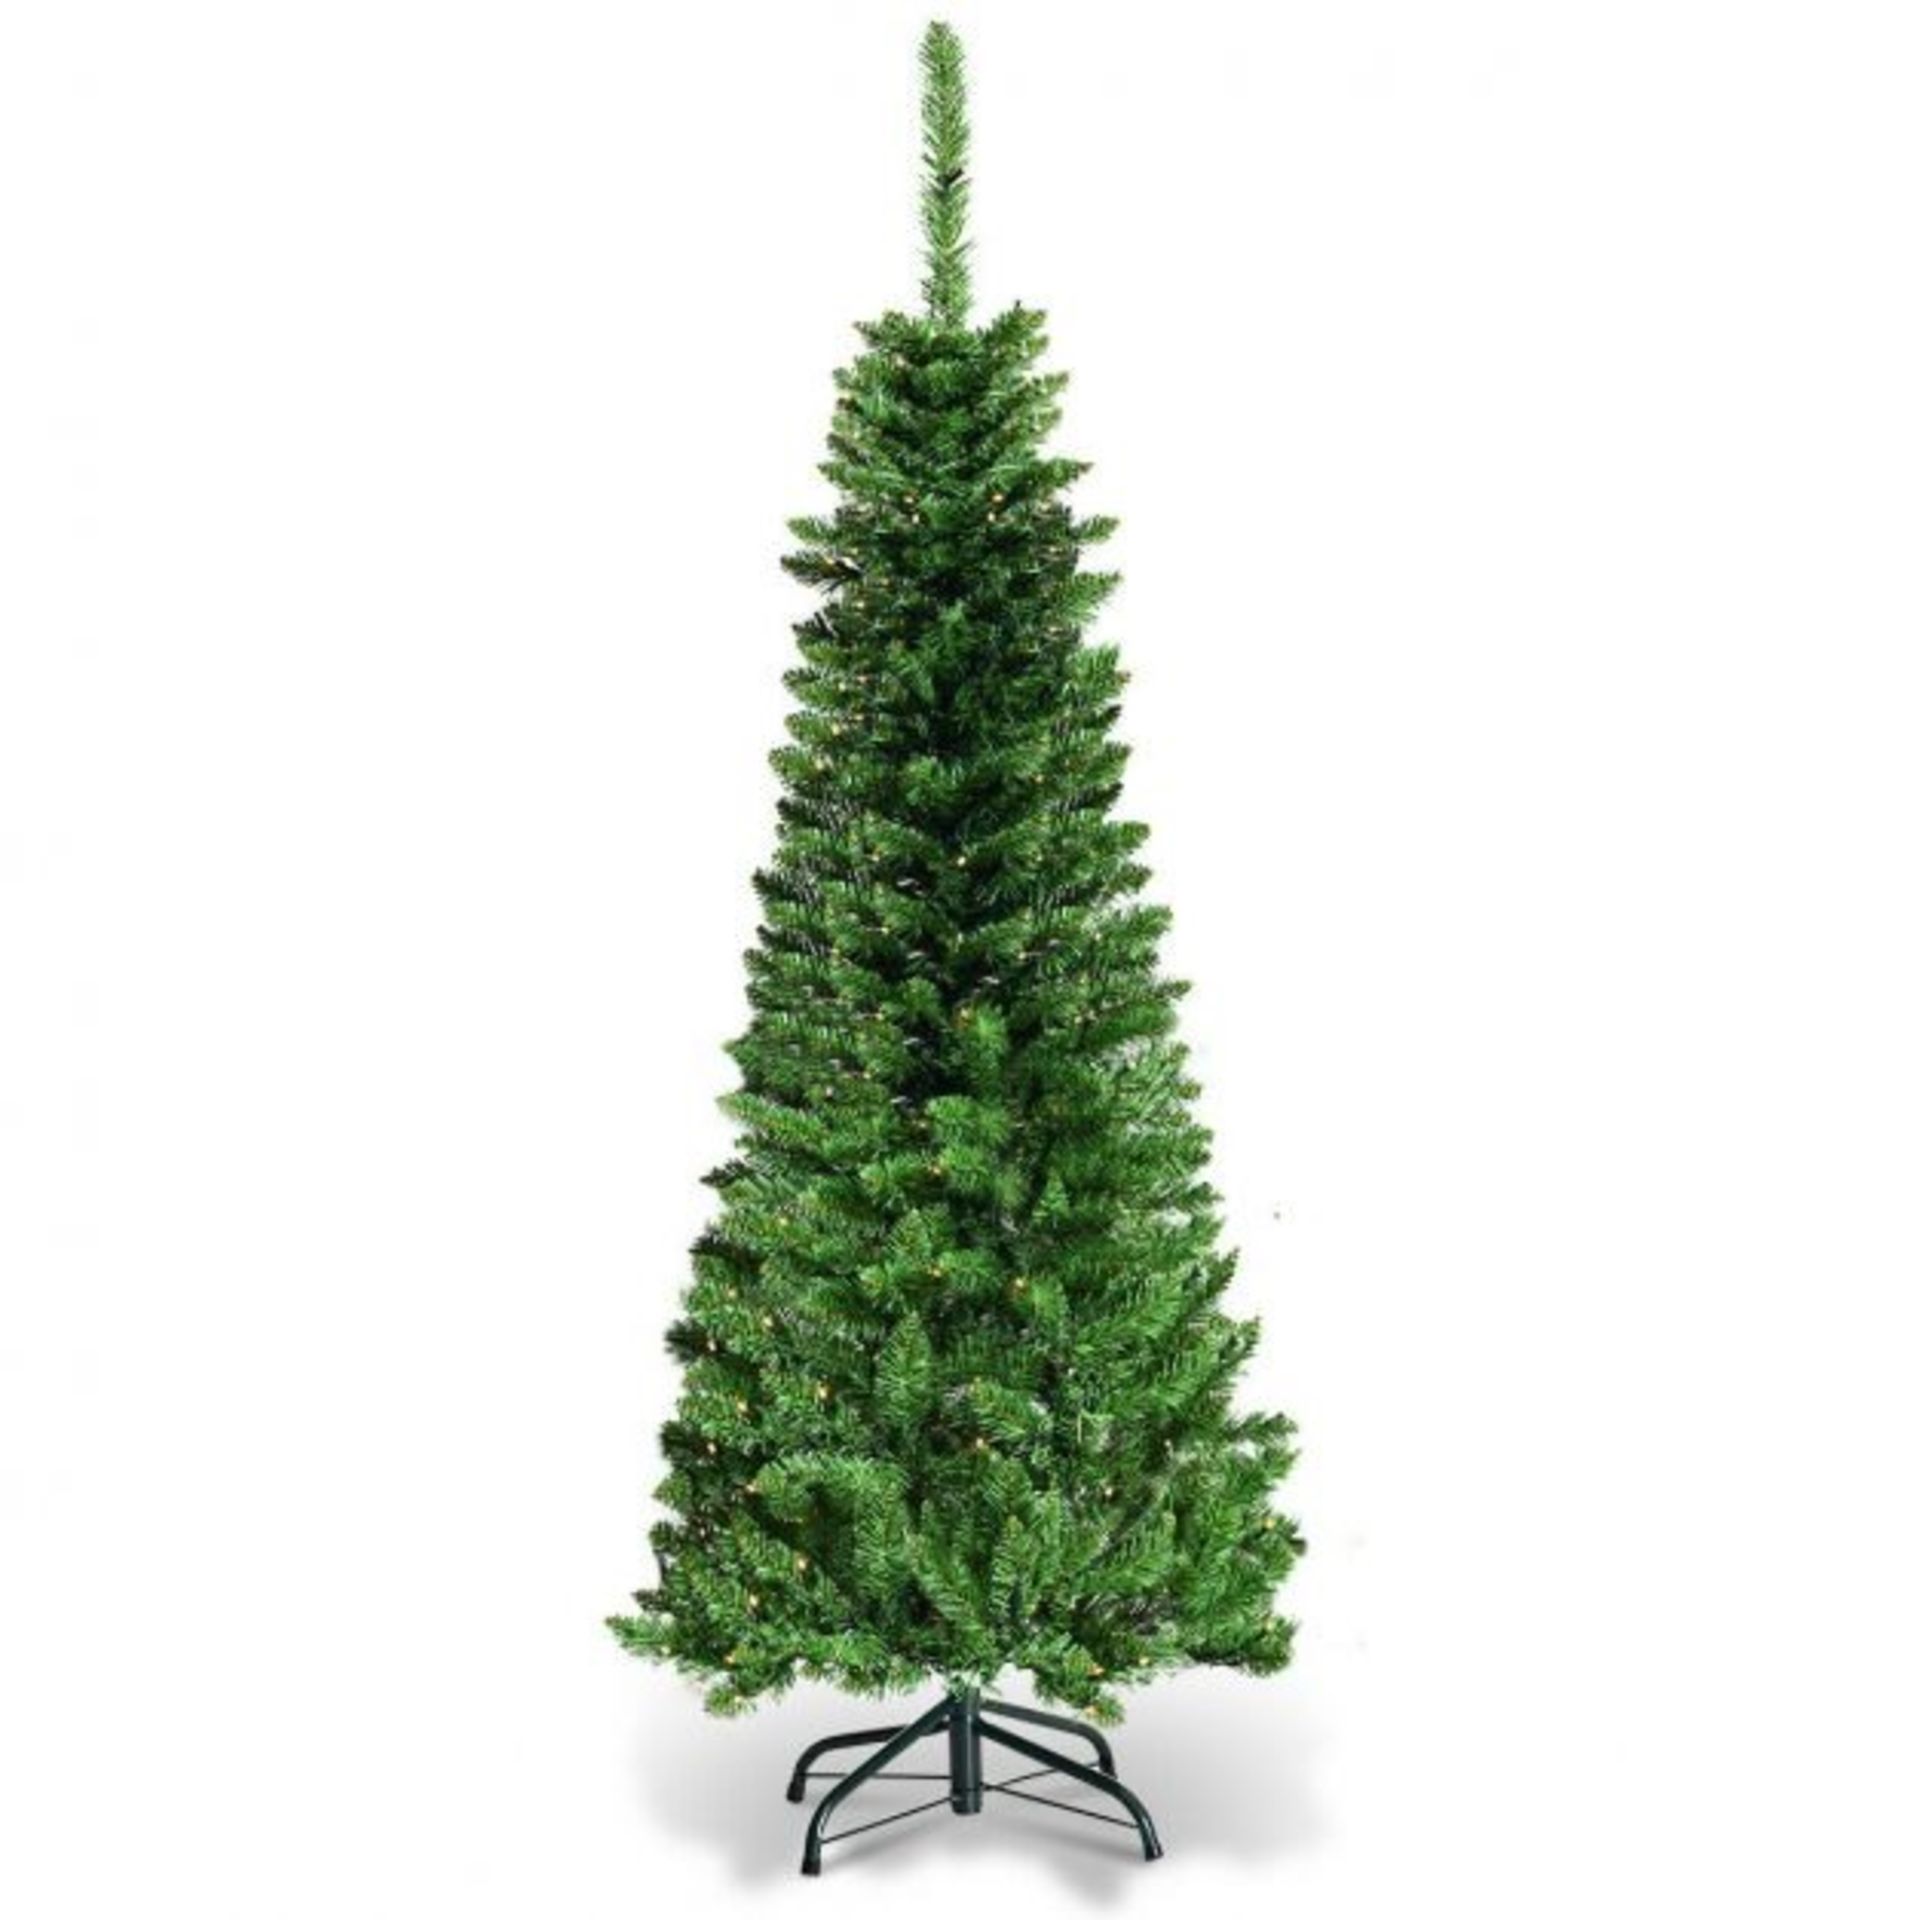 Artificial Pencil Christmas Tree with LED Lights *design may vary* - ER54